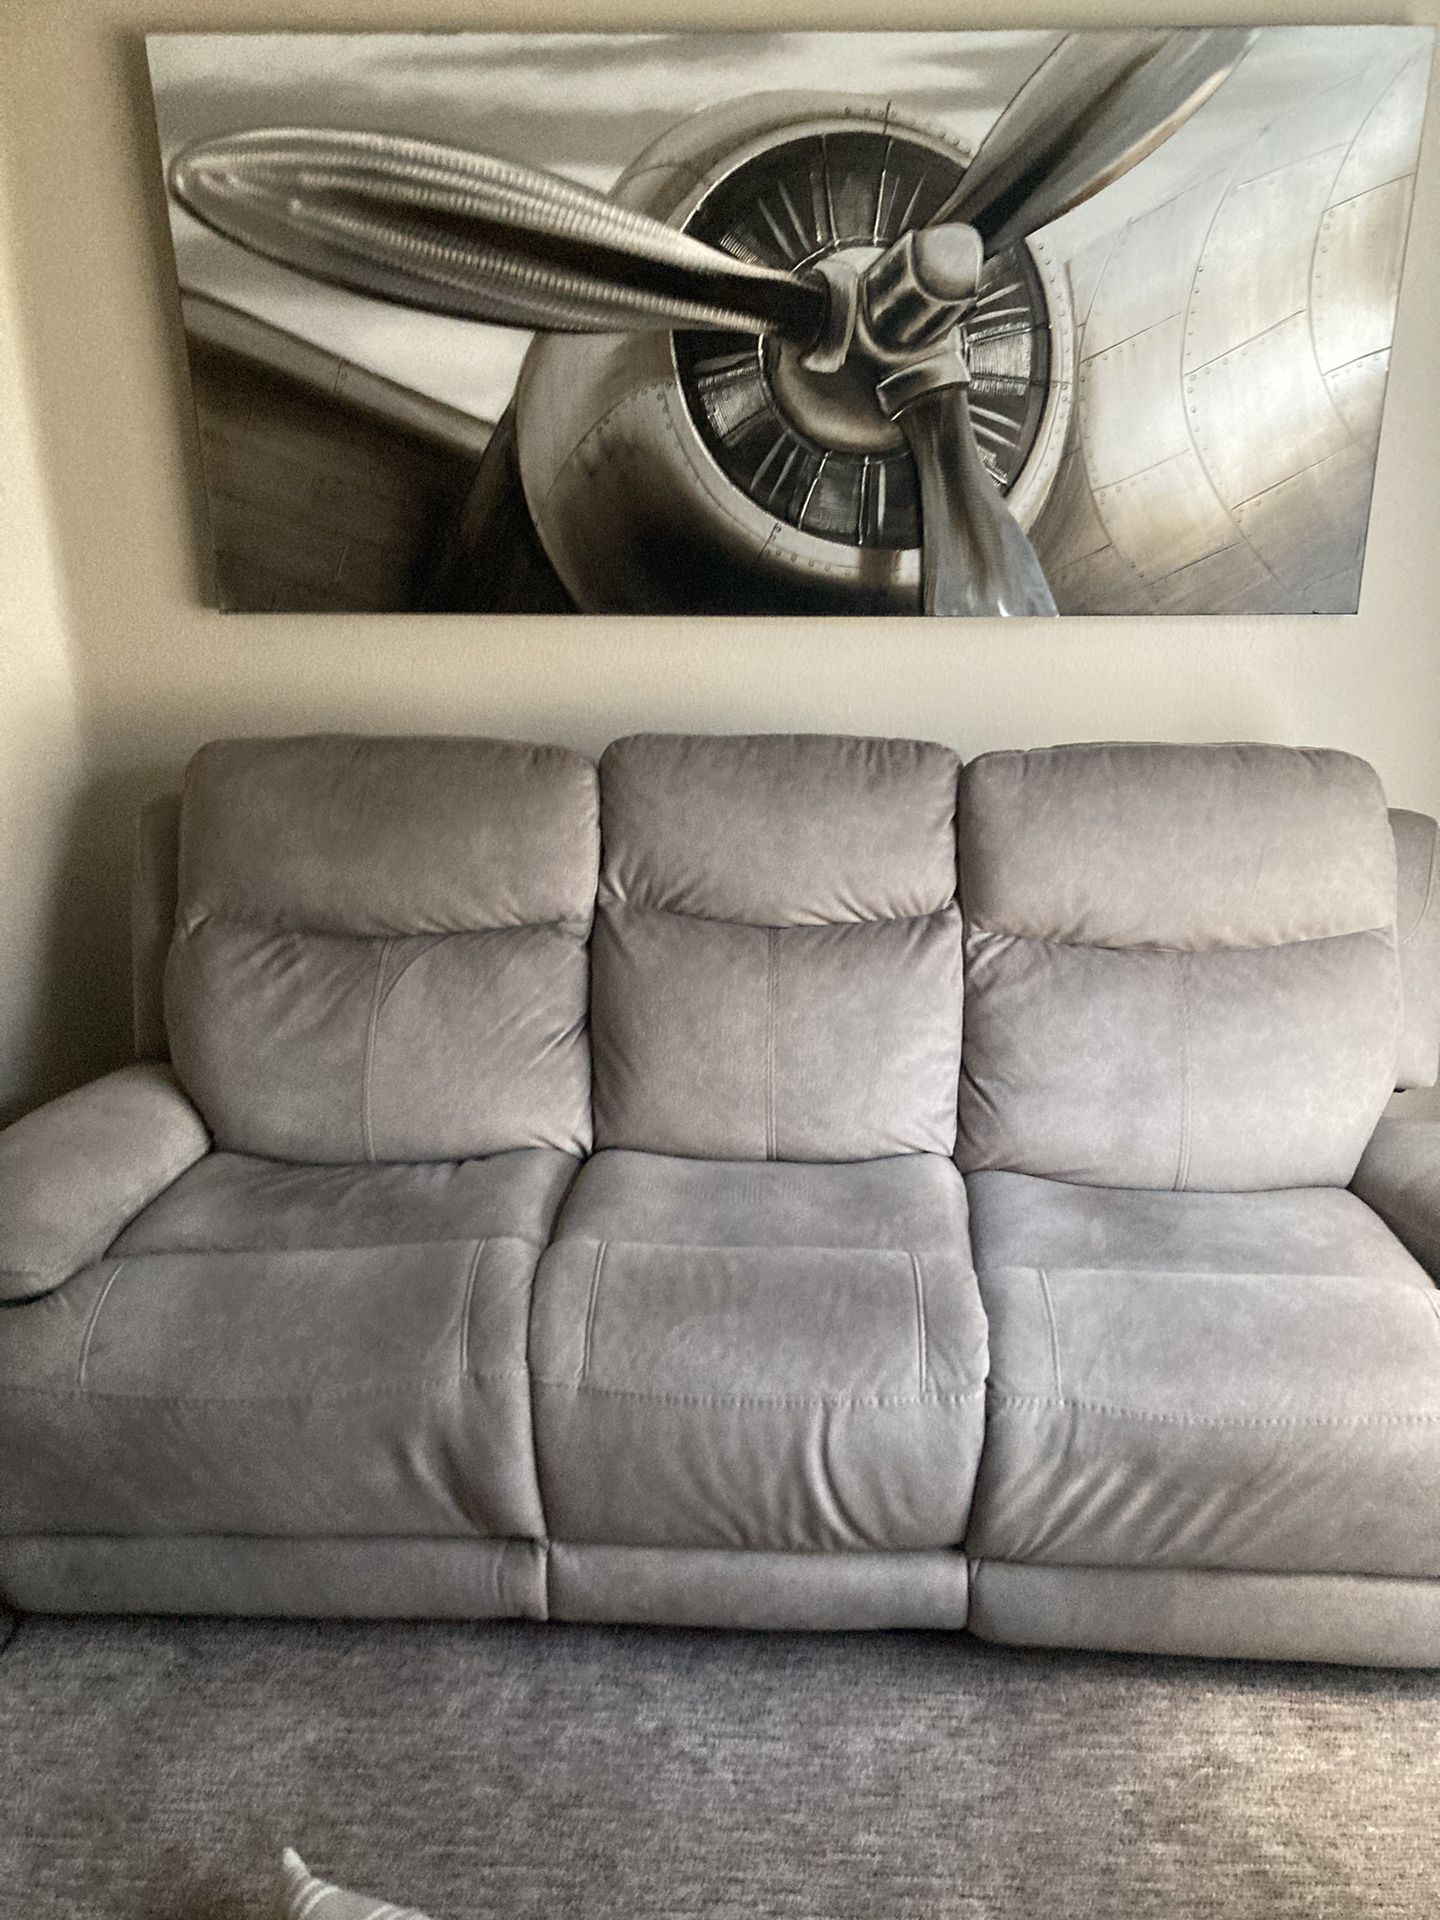 Sofa And Recliner-power operated